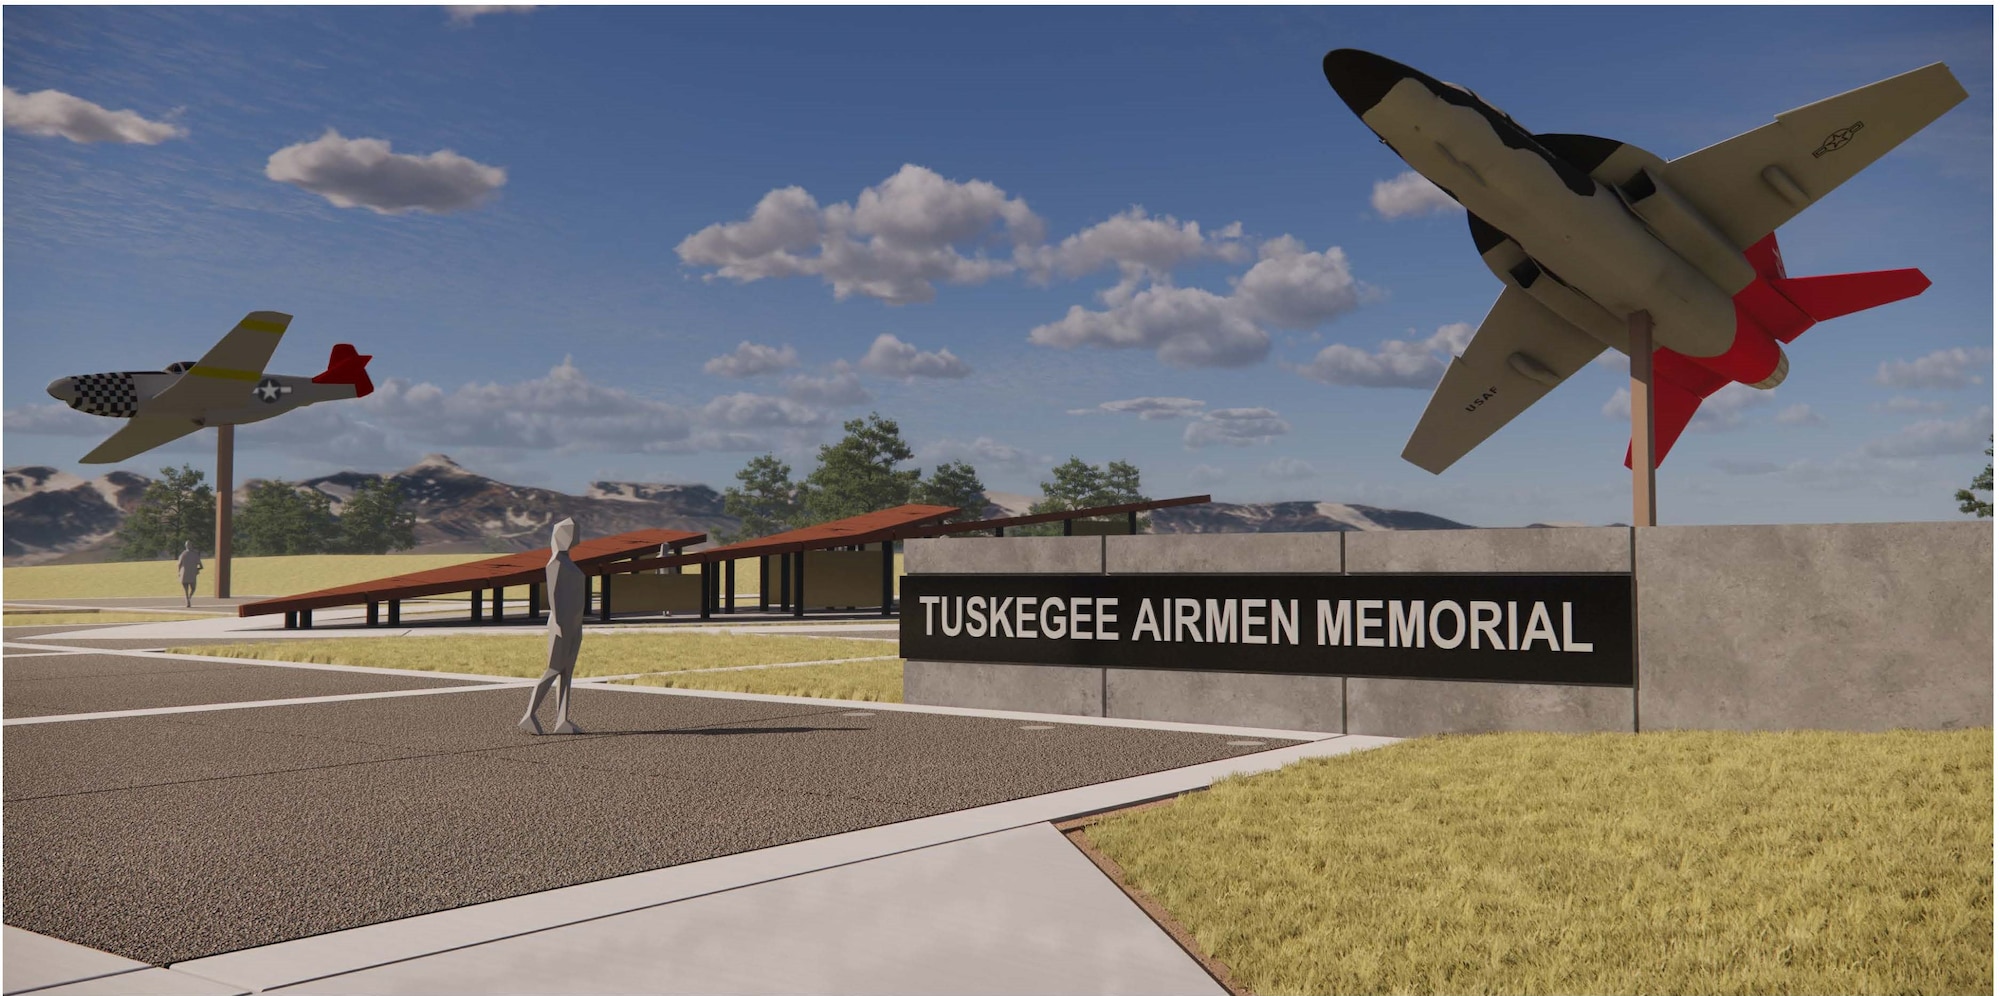 A new memorial overlooking Davis Airfield is planned to honor Tuskegee Airmen and perpetuate their legacy